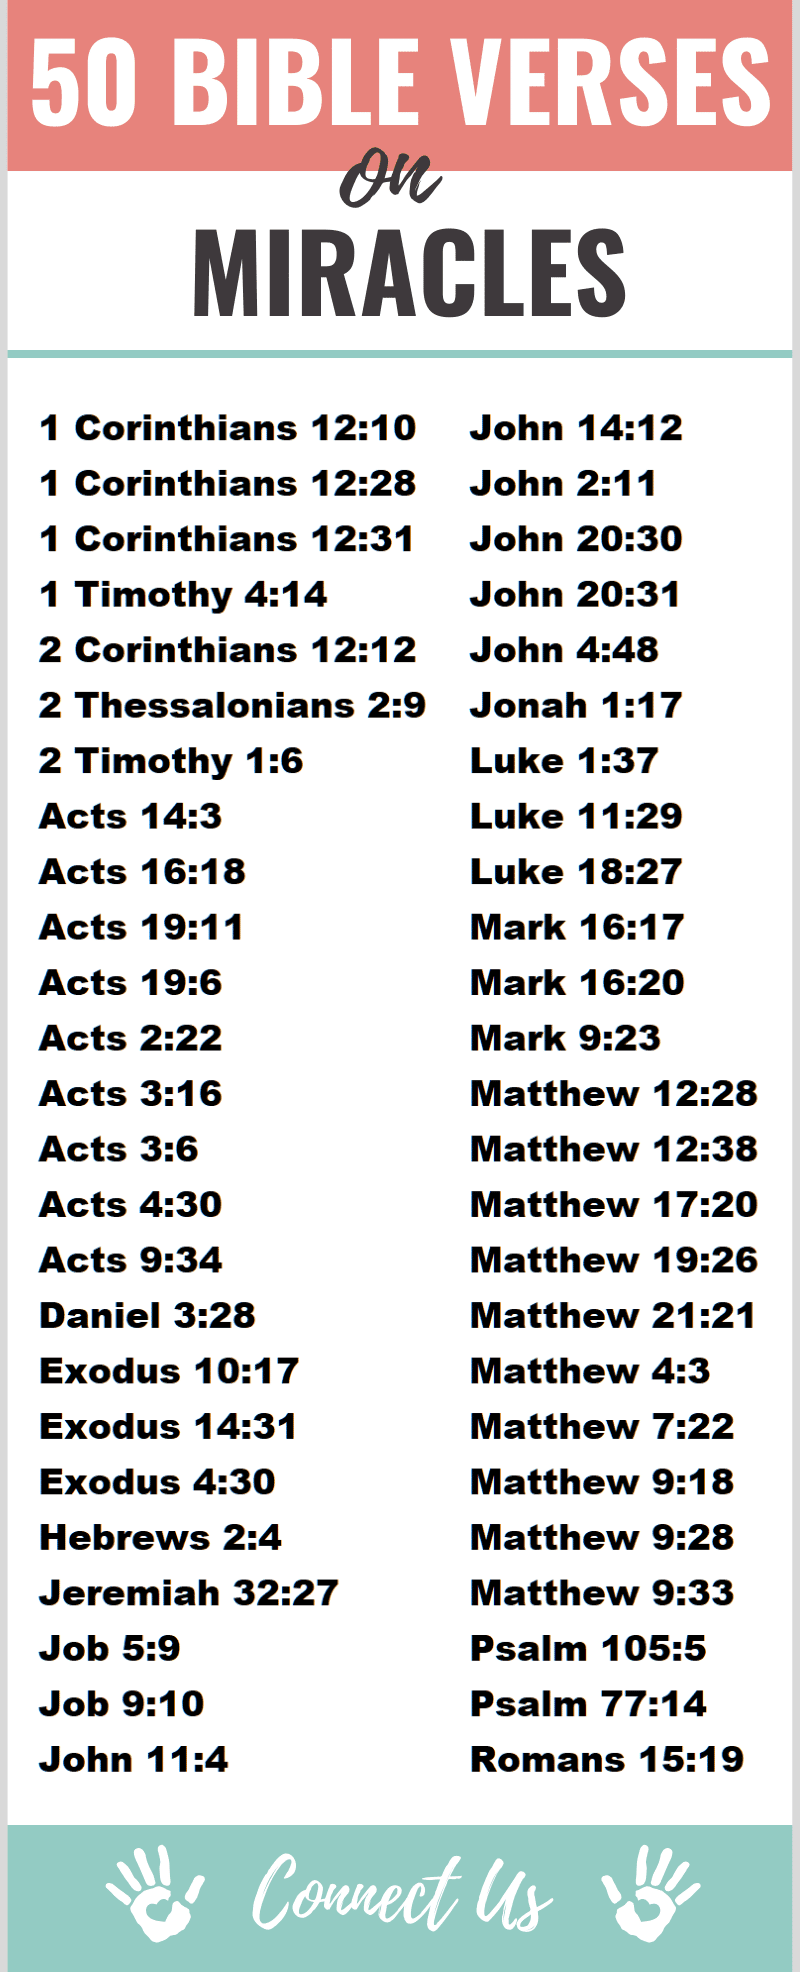 Bible Verses on Miracles